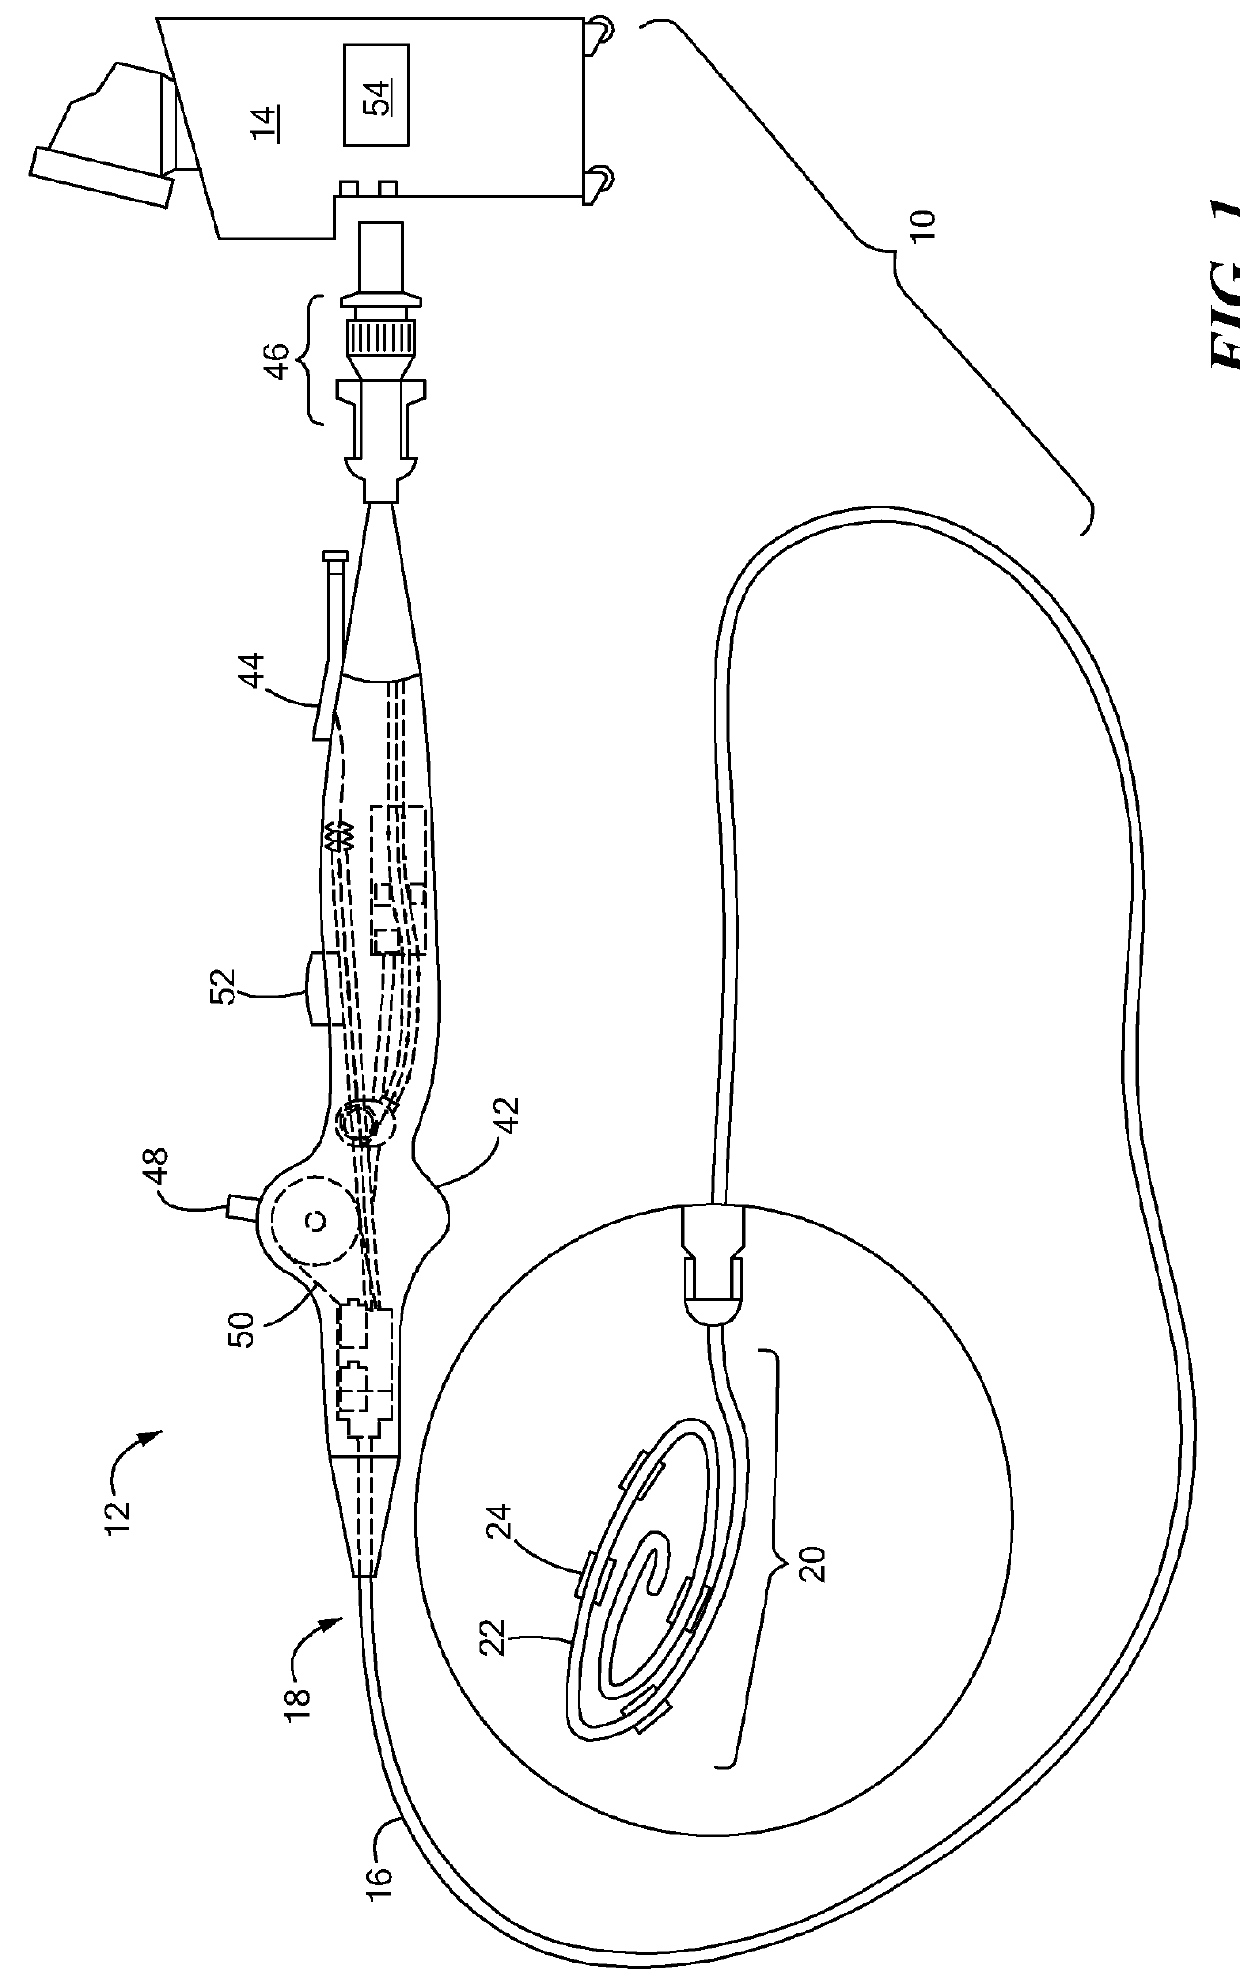 Intracardiac tools and methods for delivery of electroporation therapies